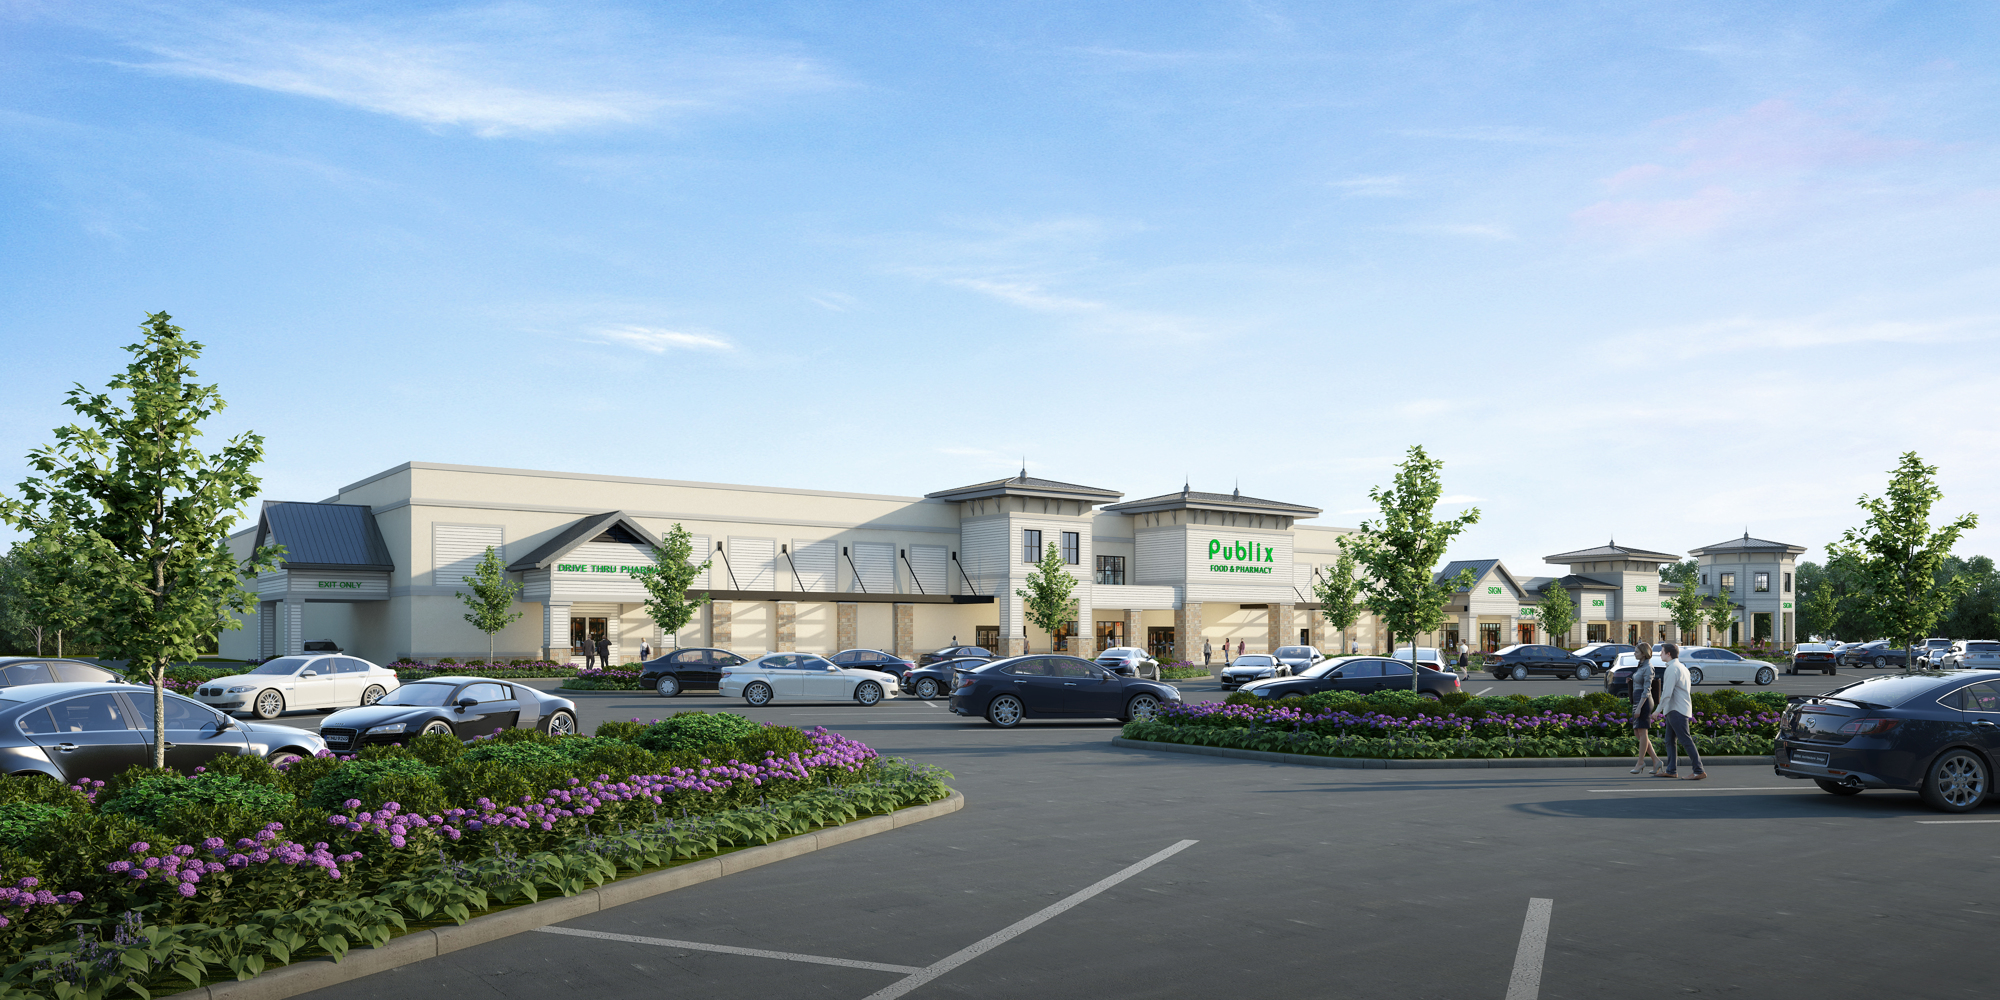 PEBB and Falcone also are developing a 65,000-square-foot center along County Road 210. It will include a Publix and other retail spaces.